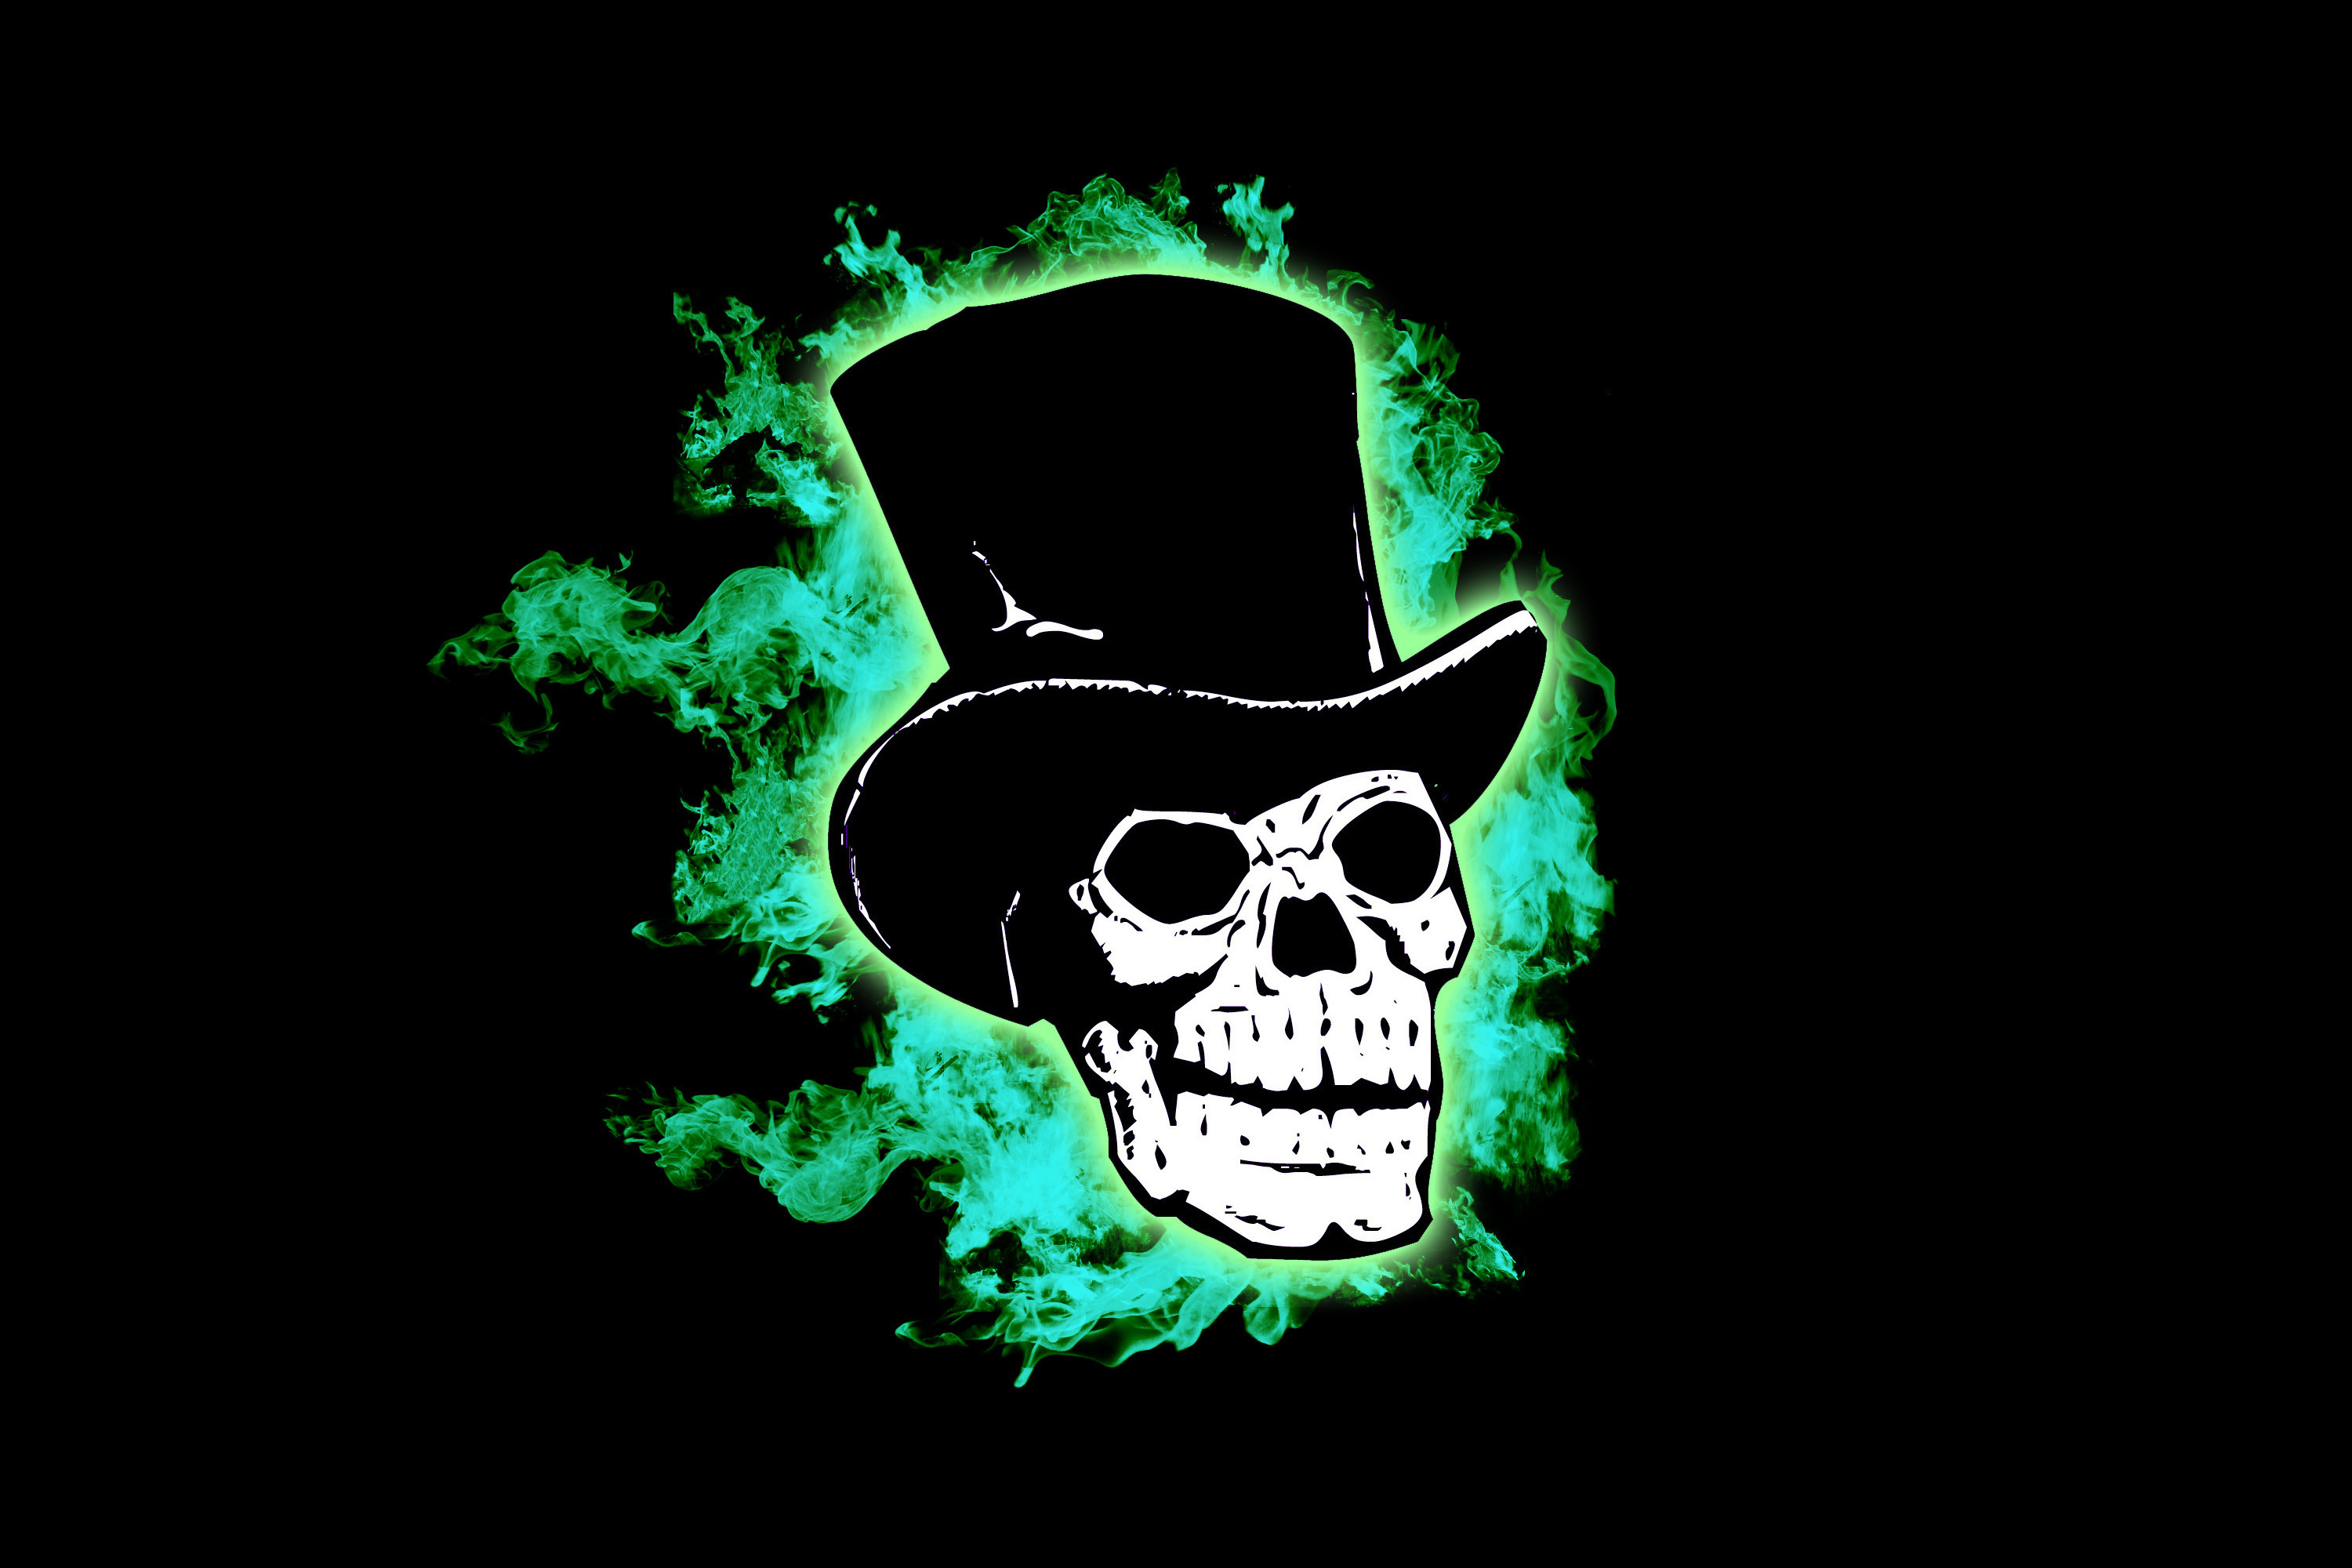 3000x2000 skull in a wearing a black top hat, with green ghostly flames